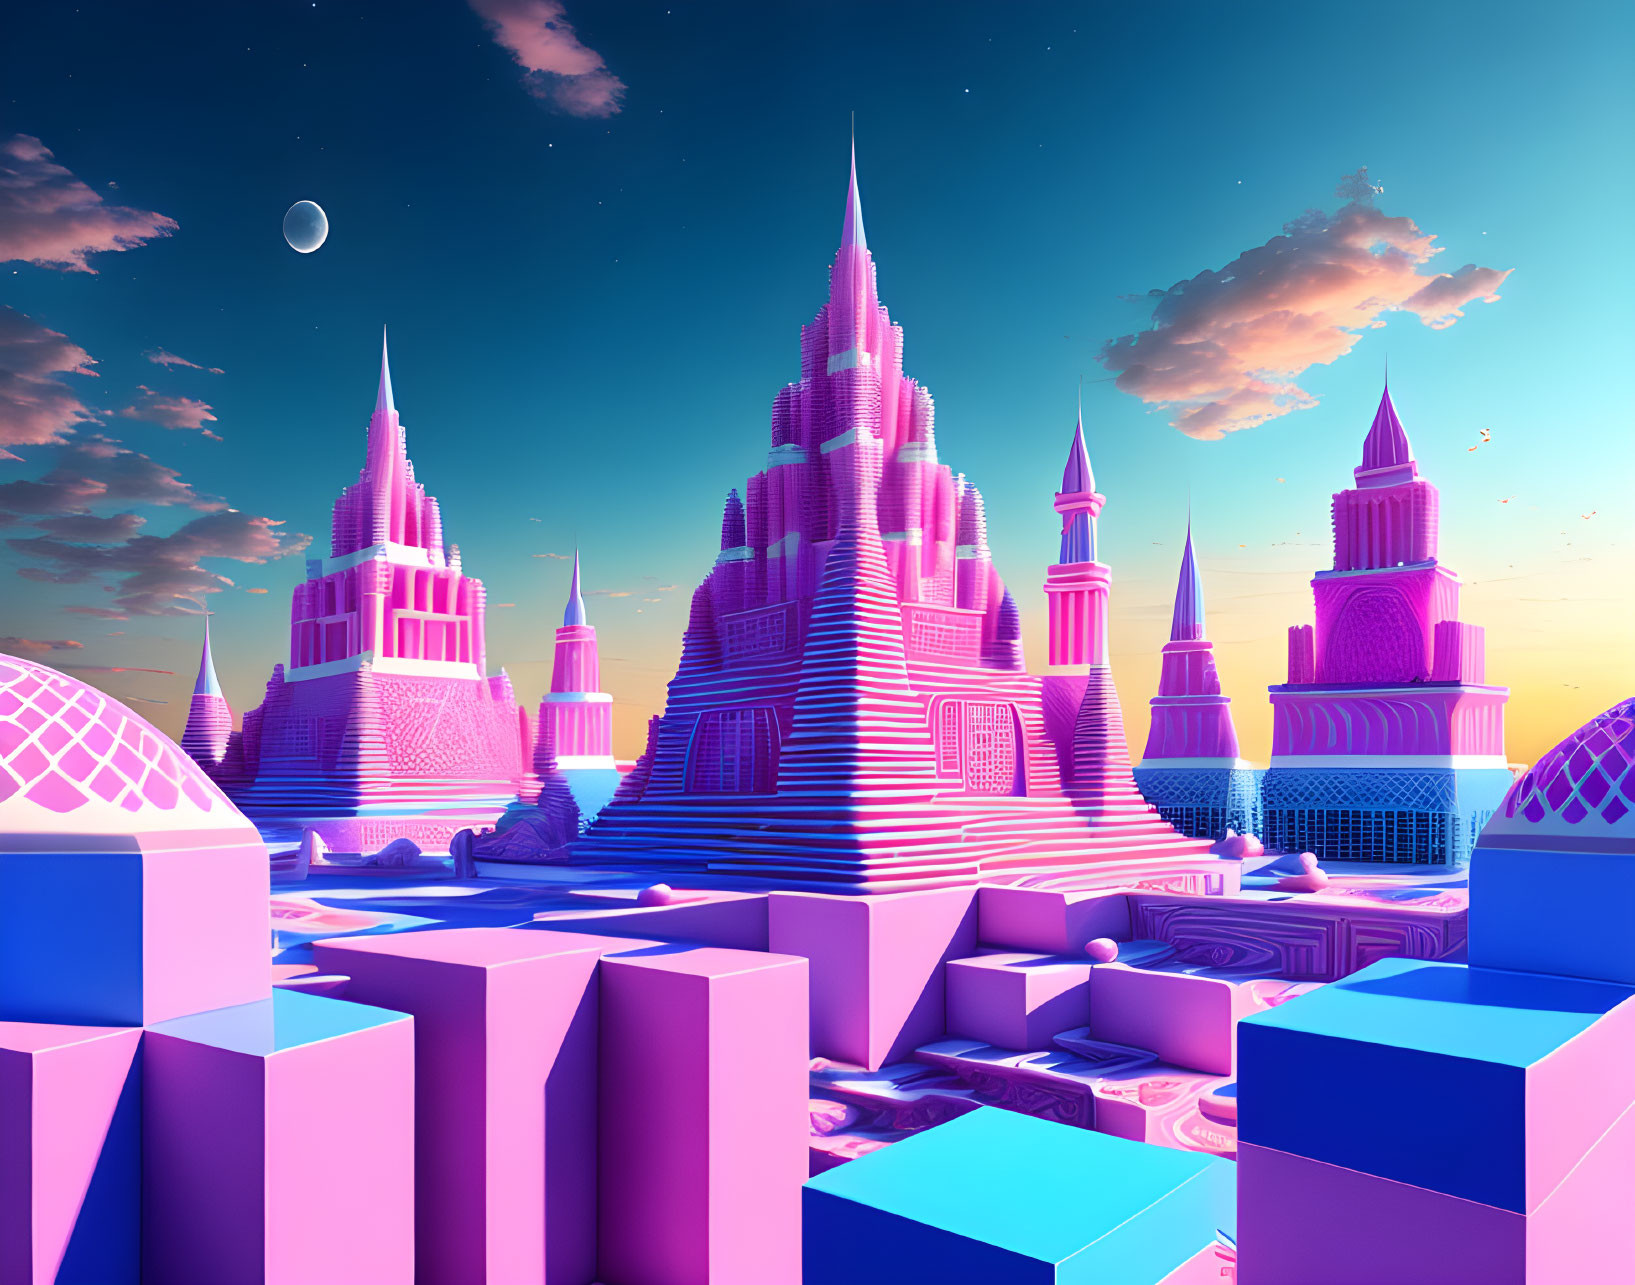 Fantastical neon-pink castle against pastel sky with geometric shapes